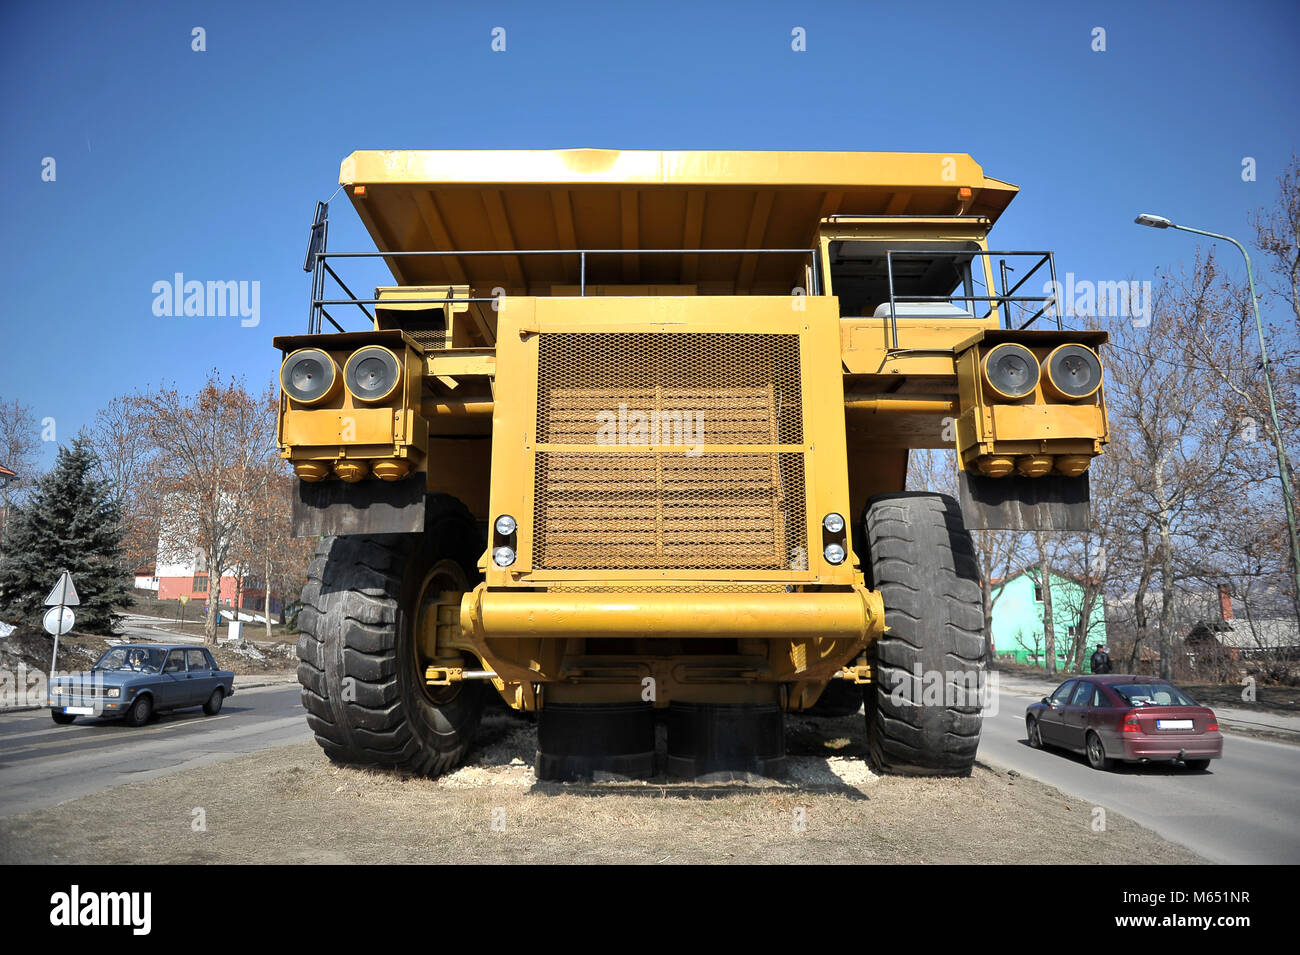 Small cars passing by big yellow mining truck Stock Photo